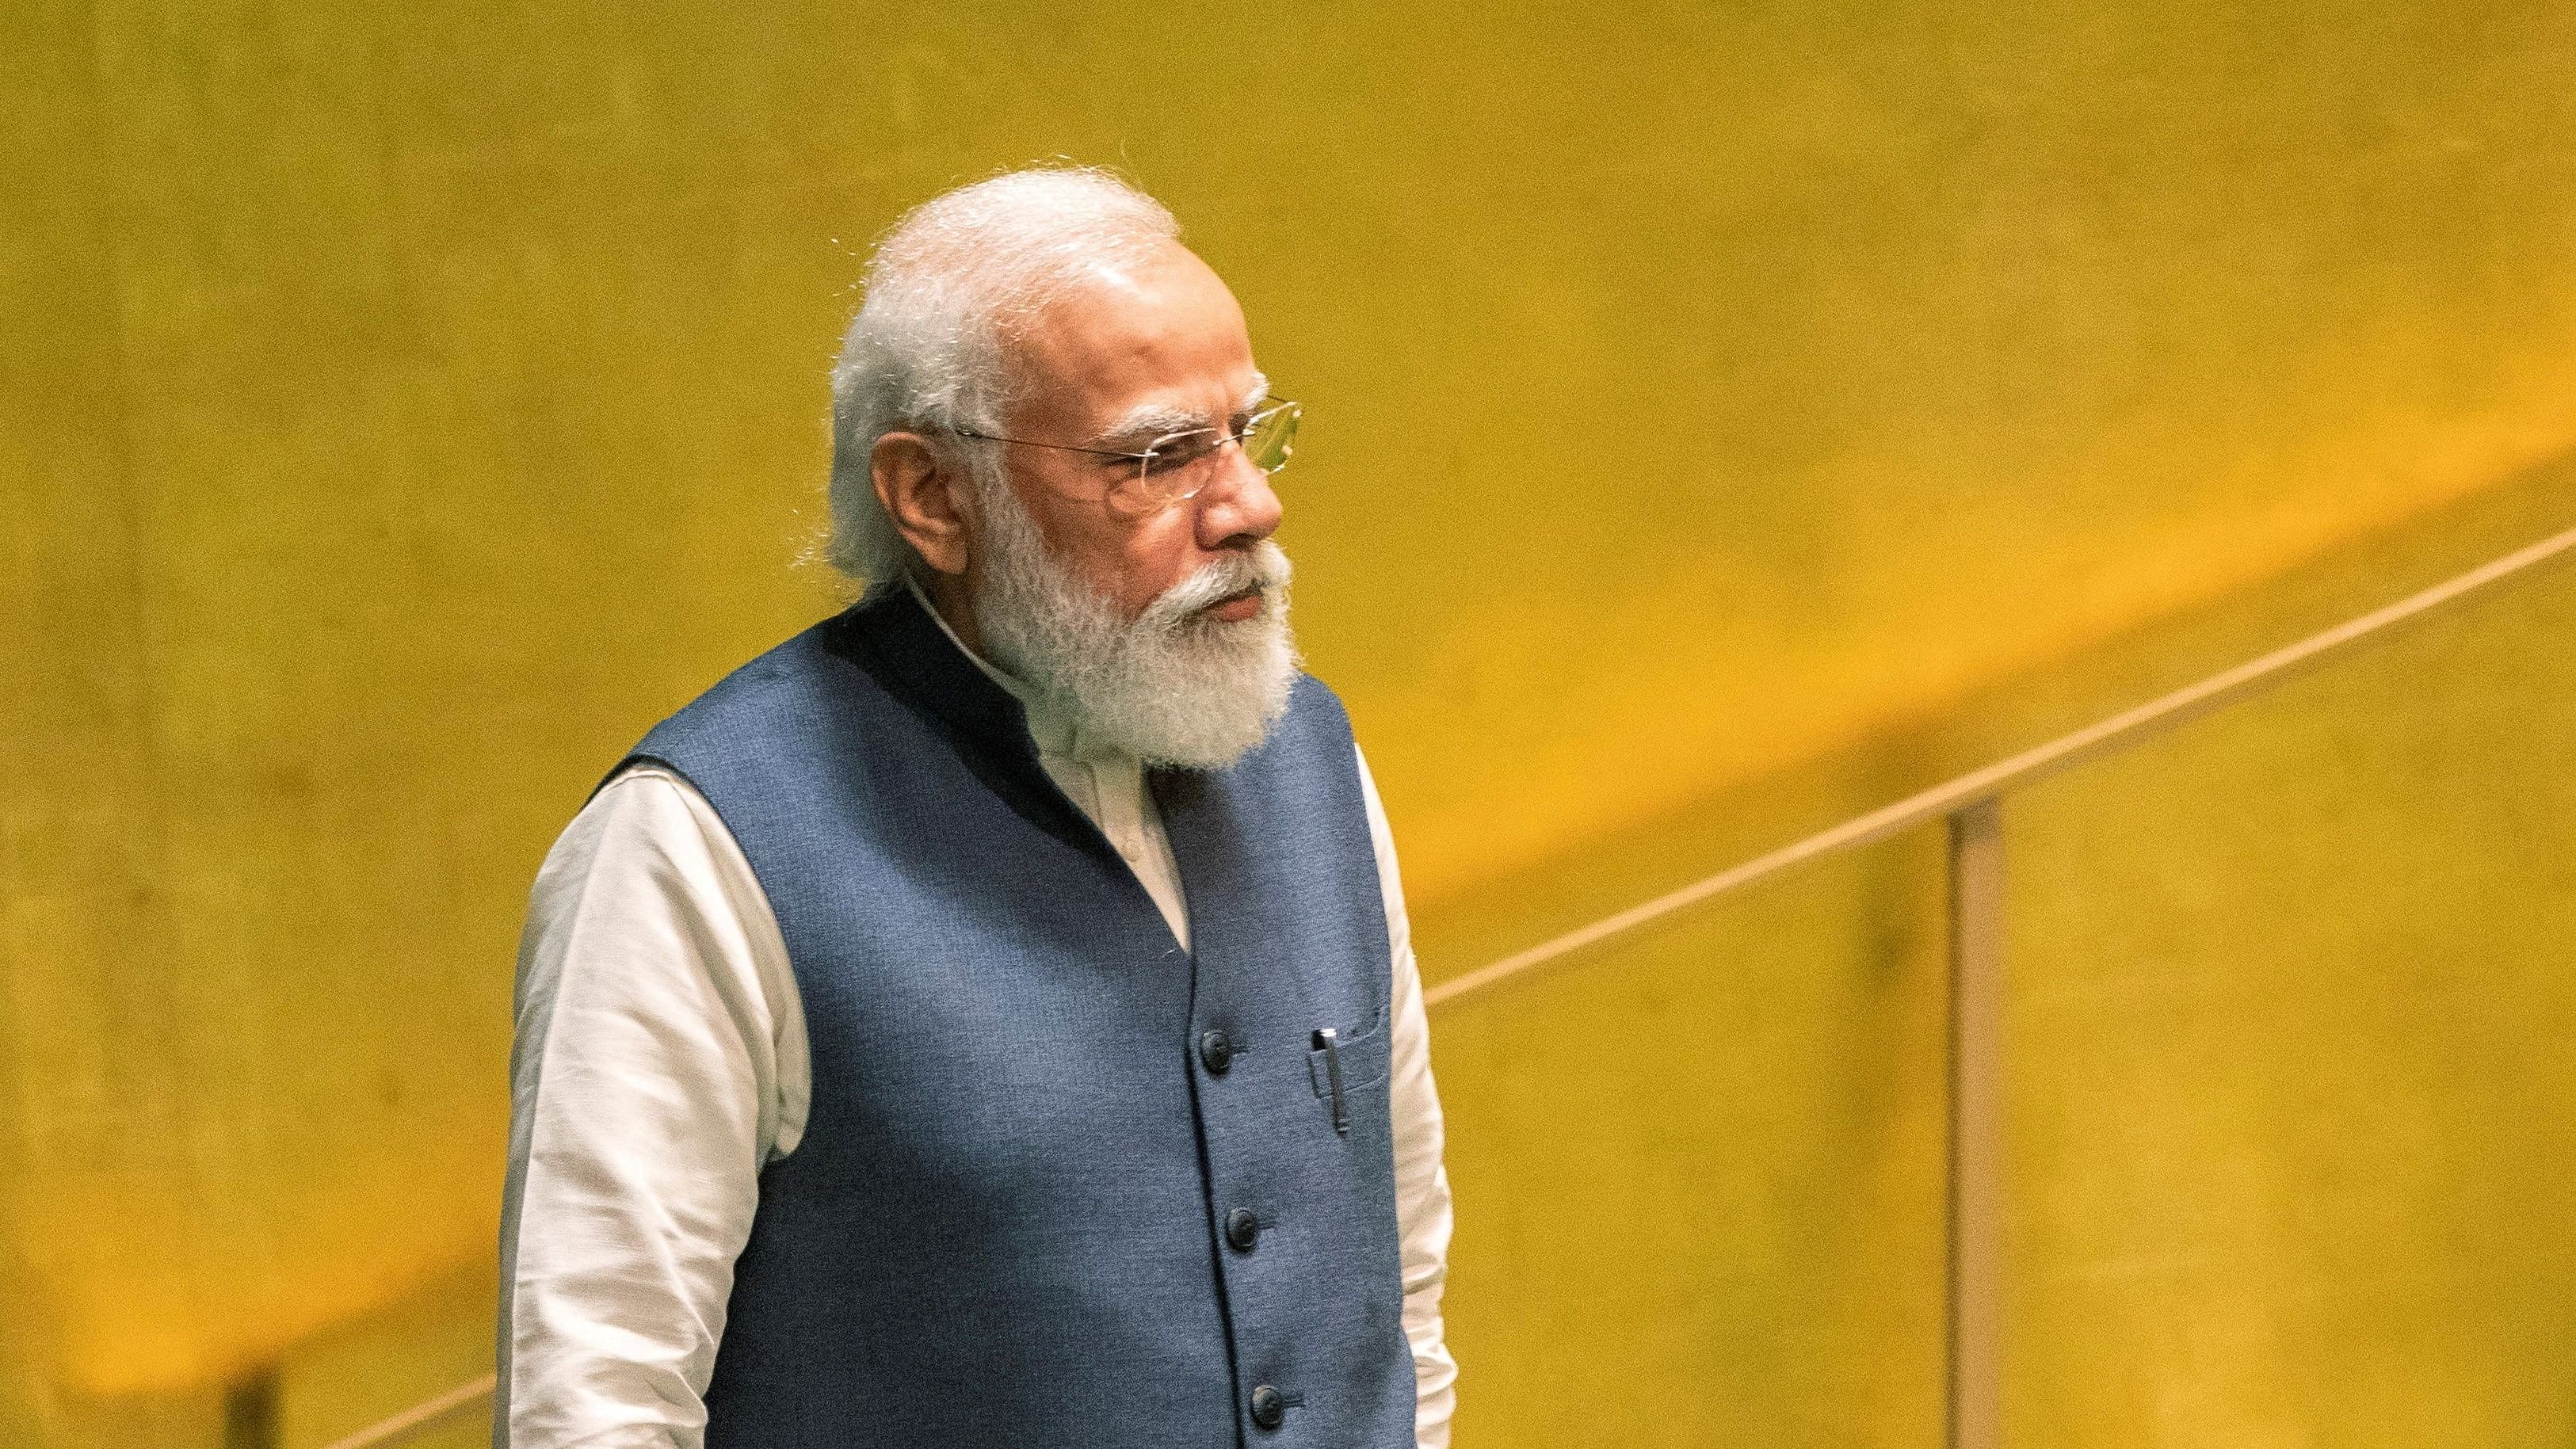 The demand comes after India’s surprise announcement at the opening of COP26 negotiations in Glasgow, Scotland, that it would set an ambitious new goal to reach net-zero emissions by 2070. In his speech, Prime Minister Narendra Modi said that rich countries should provide as much as $1 trillion in climate finance. Credit: Reuters File Photo